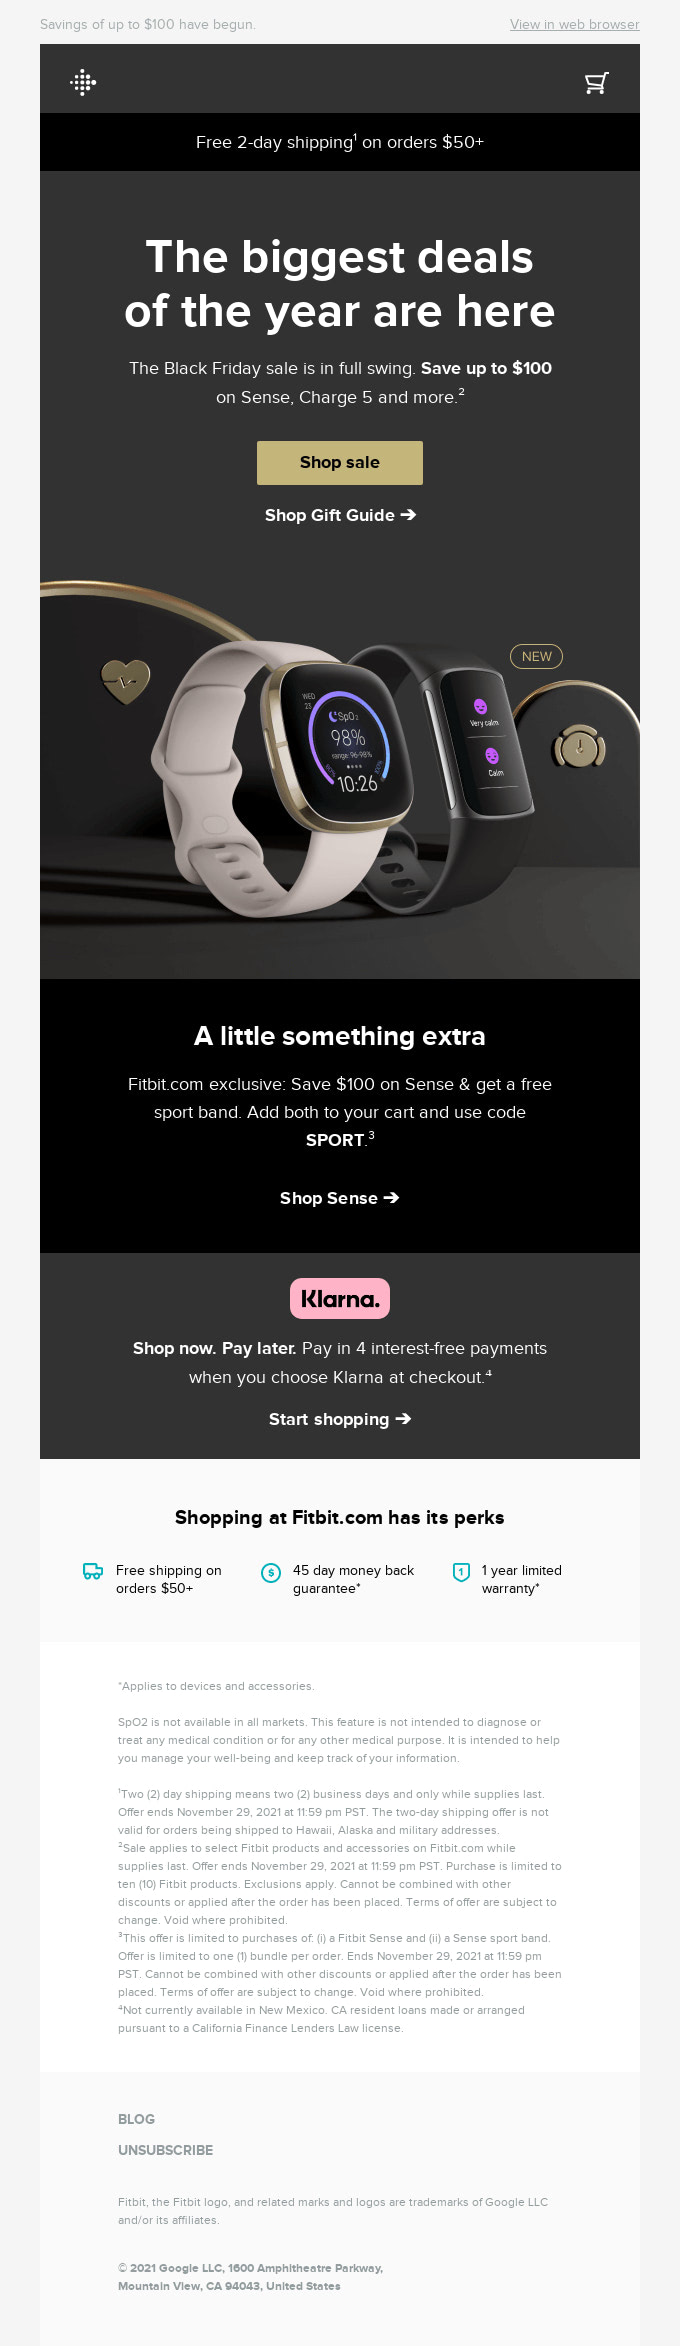 Email from Fitbit